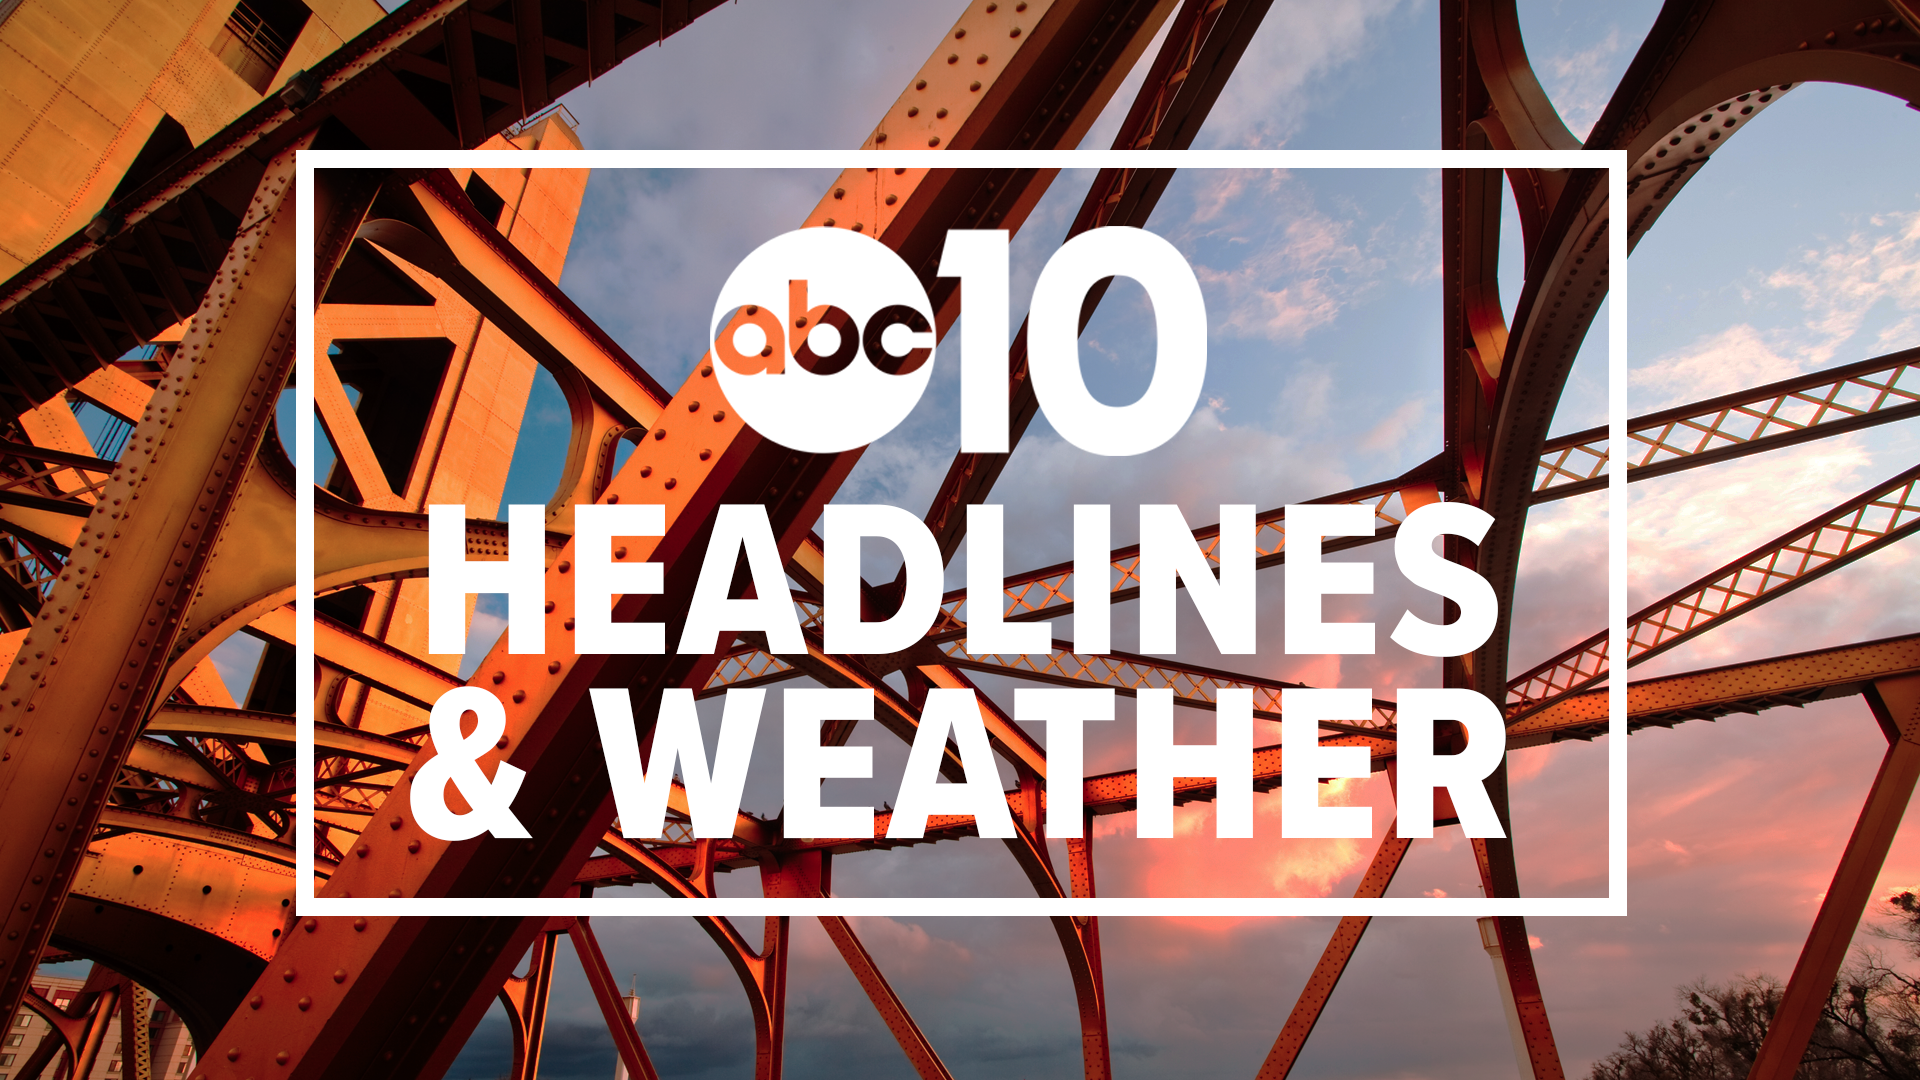 Evening Headlines: Jan. 8, 2020 | Catch in-depth reporting on #LateNewsTonight at 11 p.m. | The latest Sacramento news is always at www.abc10.com.